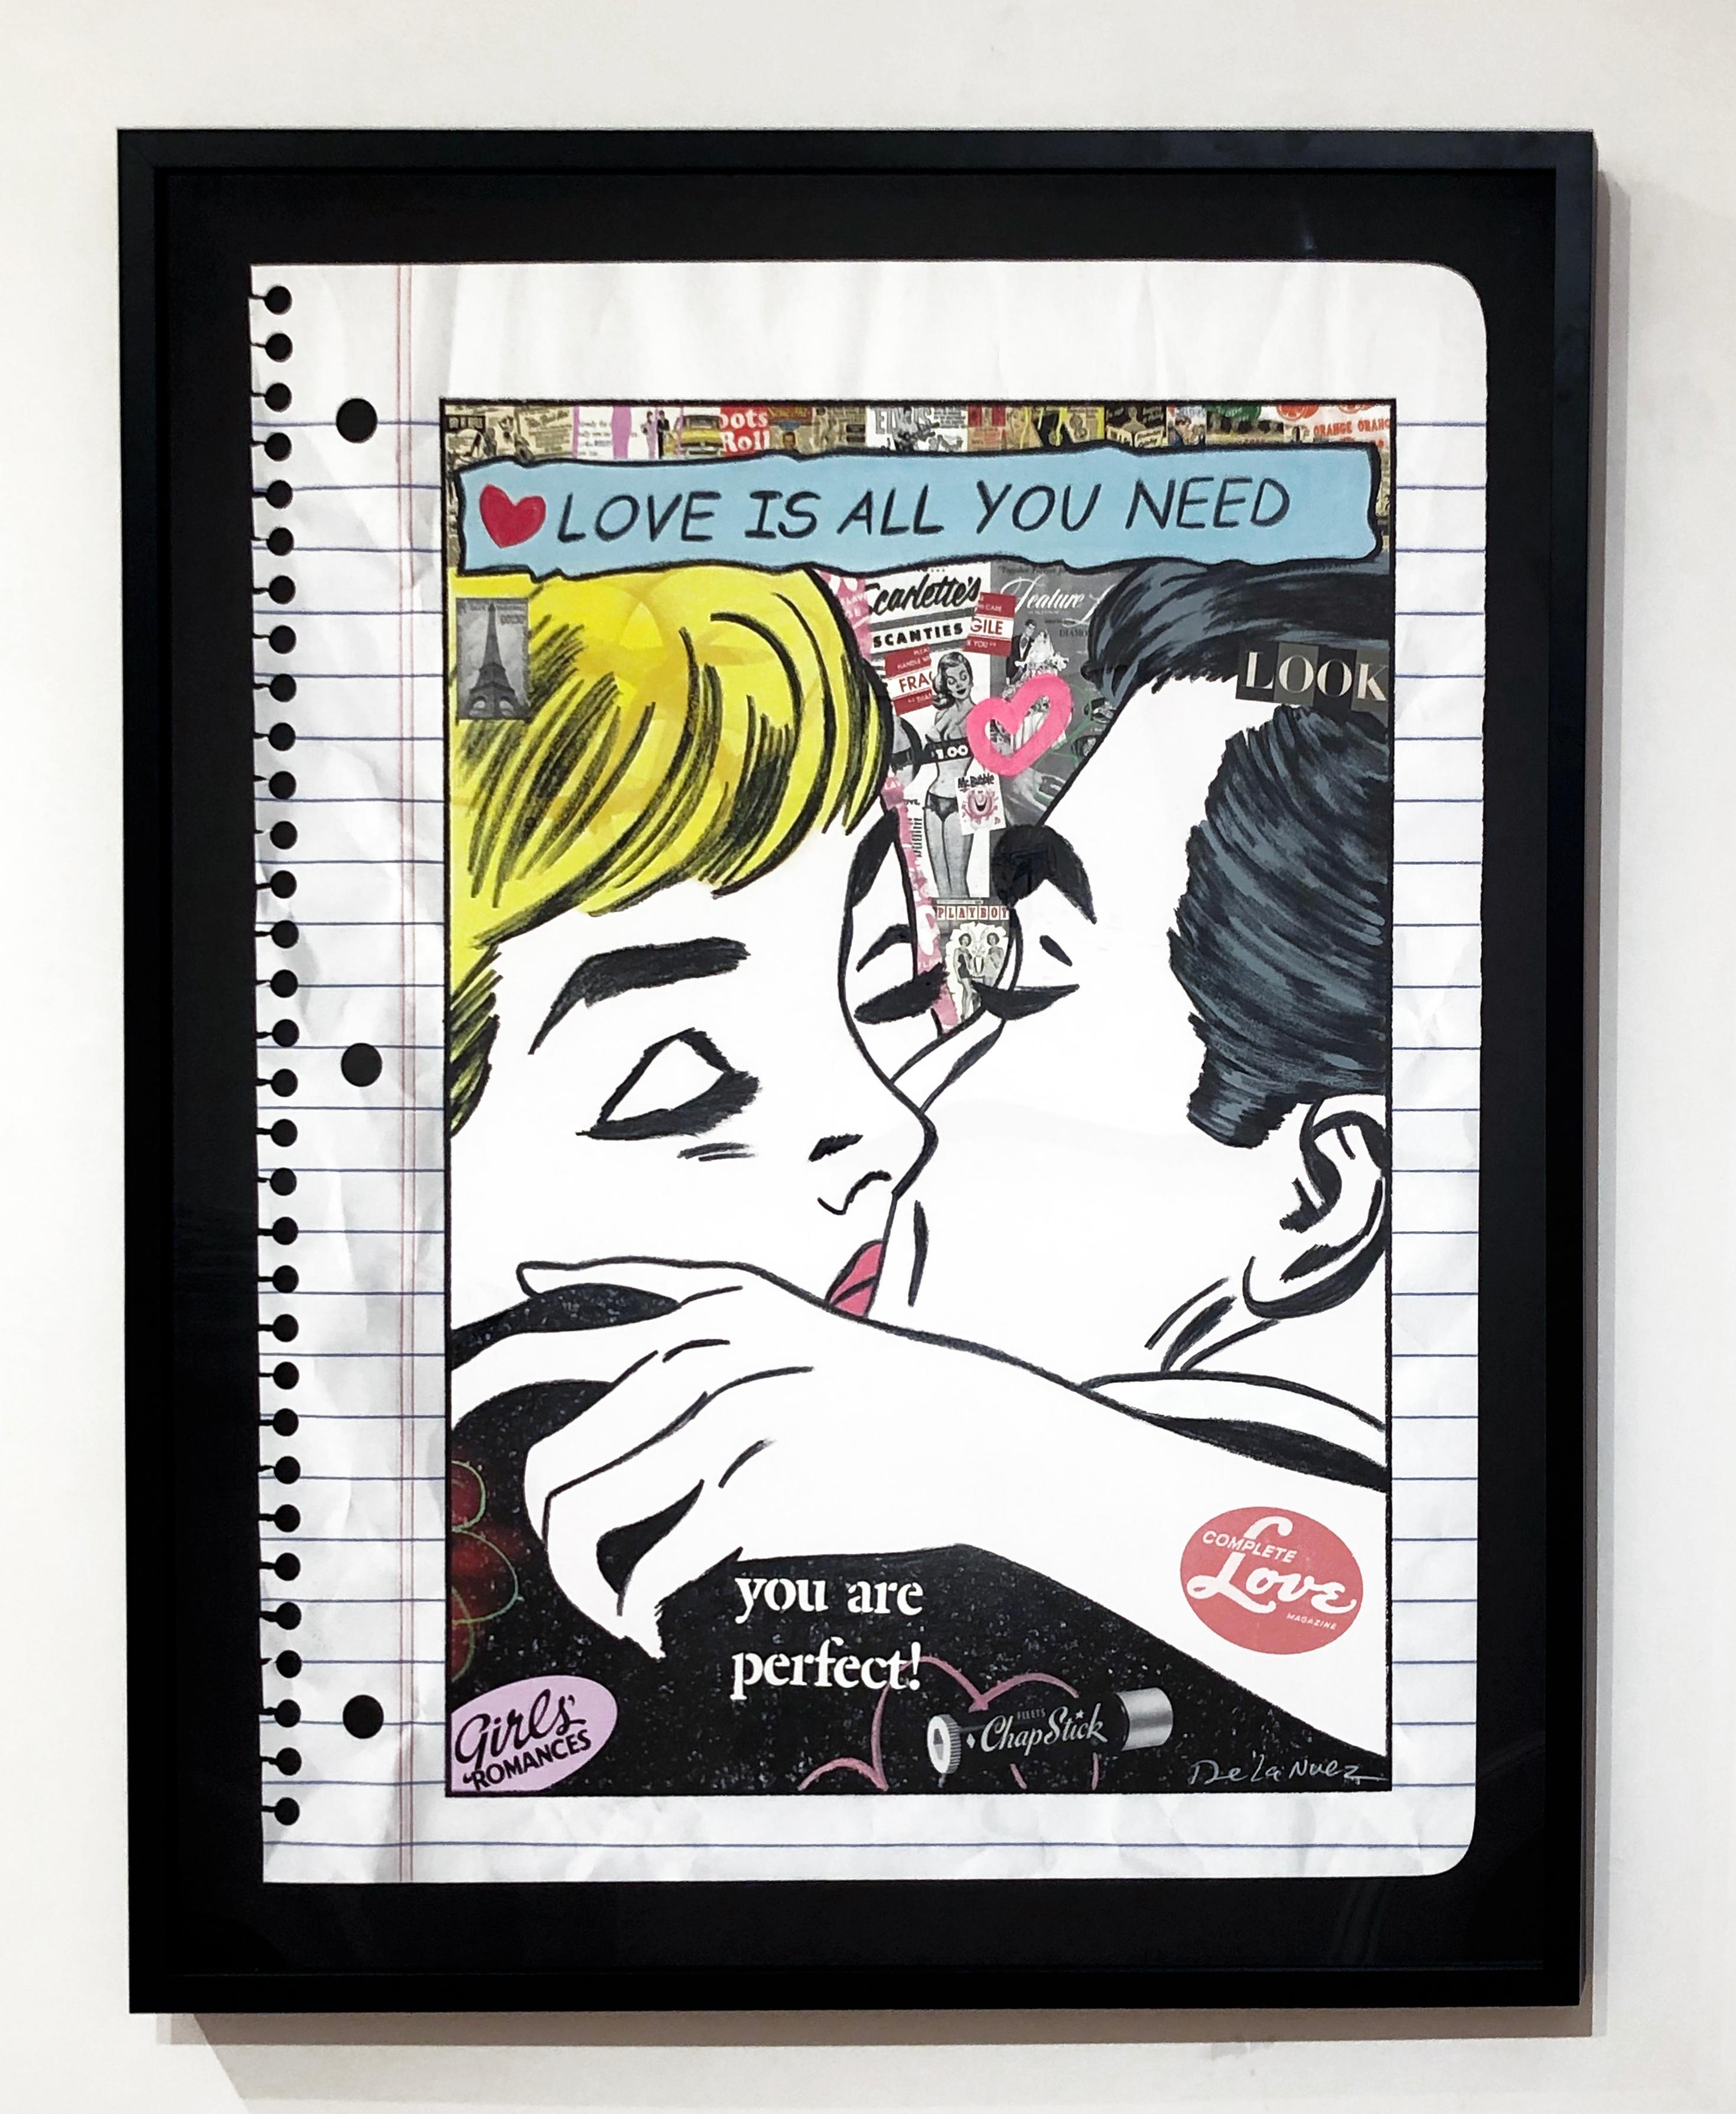 Love Is All You Need - Contemporary Mixed Media Art by Nelson De La Nuez